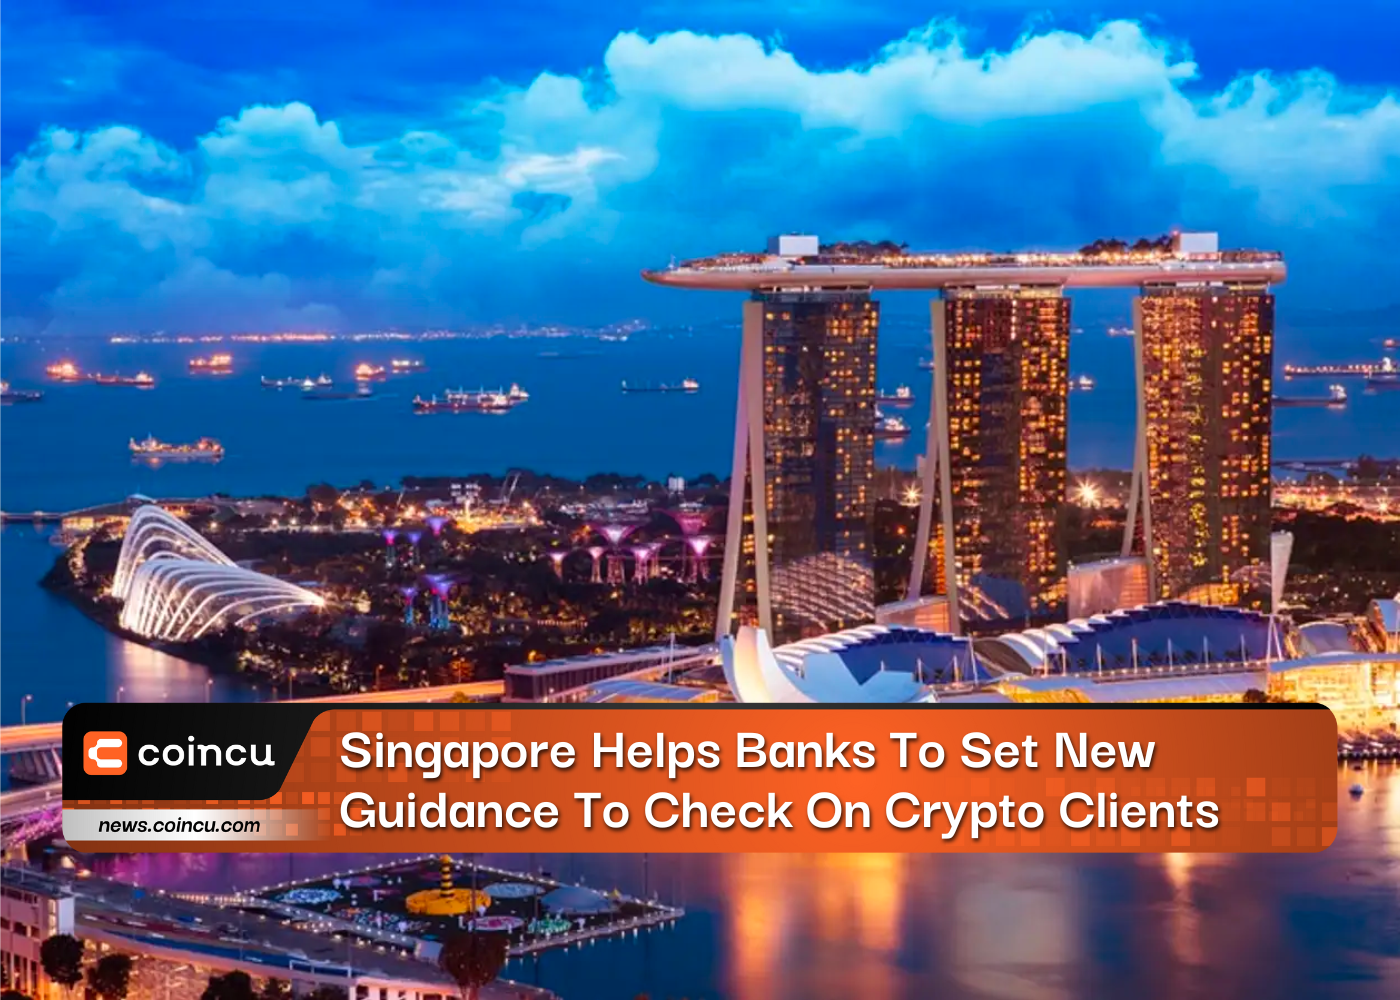 Singapore Helps Banks To Set New Guidance To Check On Crypto Clients